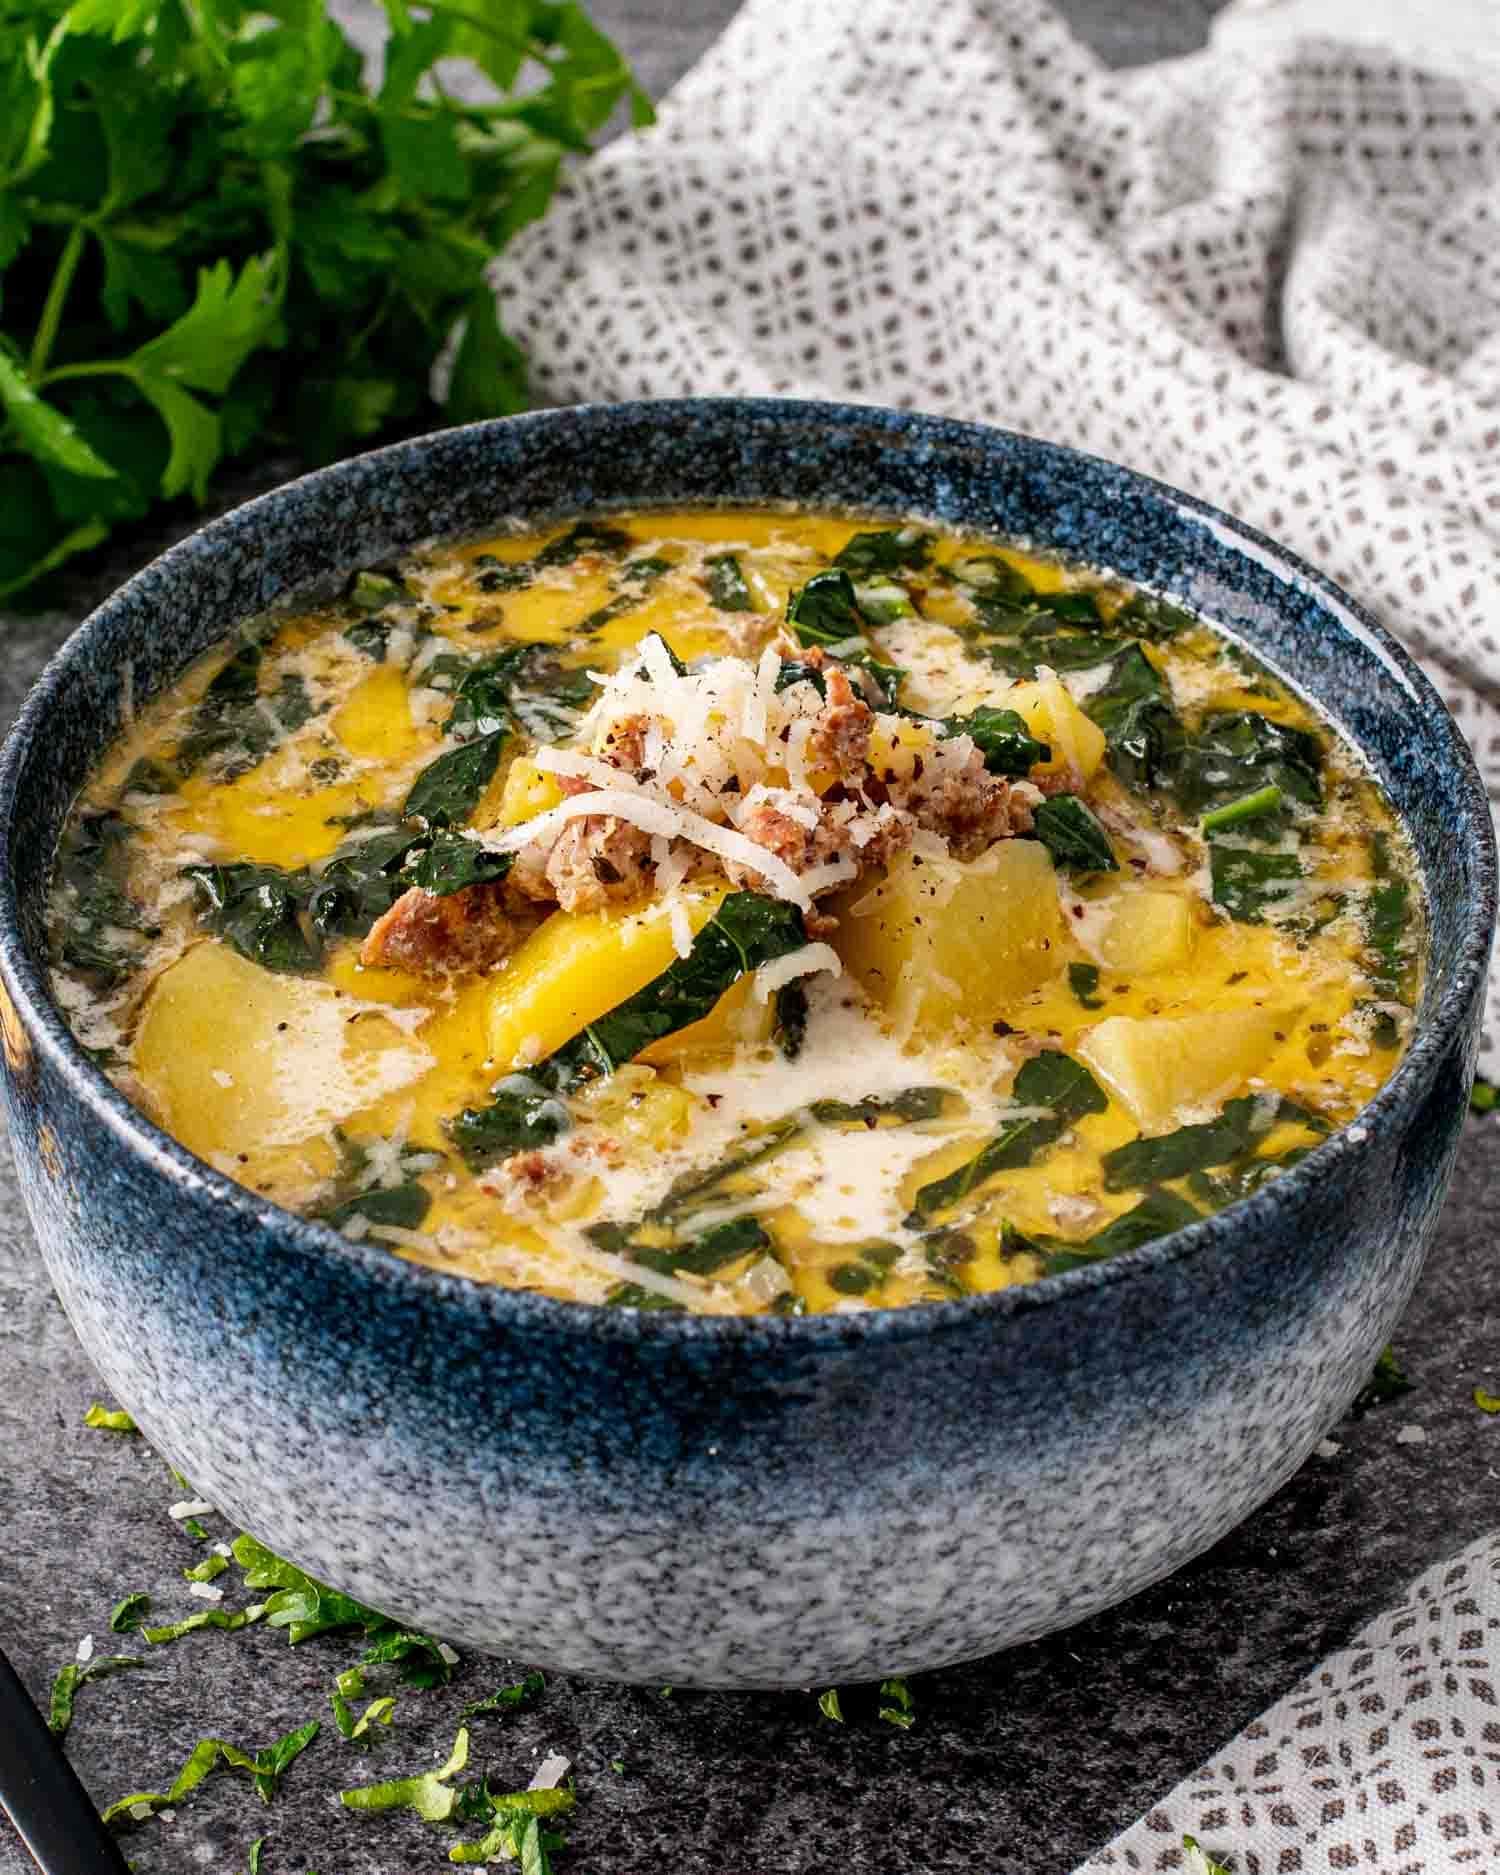 Bowl of homemade Instant Pot Zuppa Toscana with Italian sausage, potatoes and kale